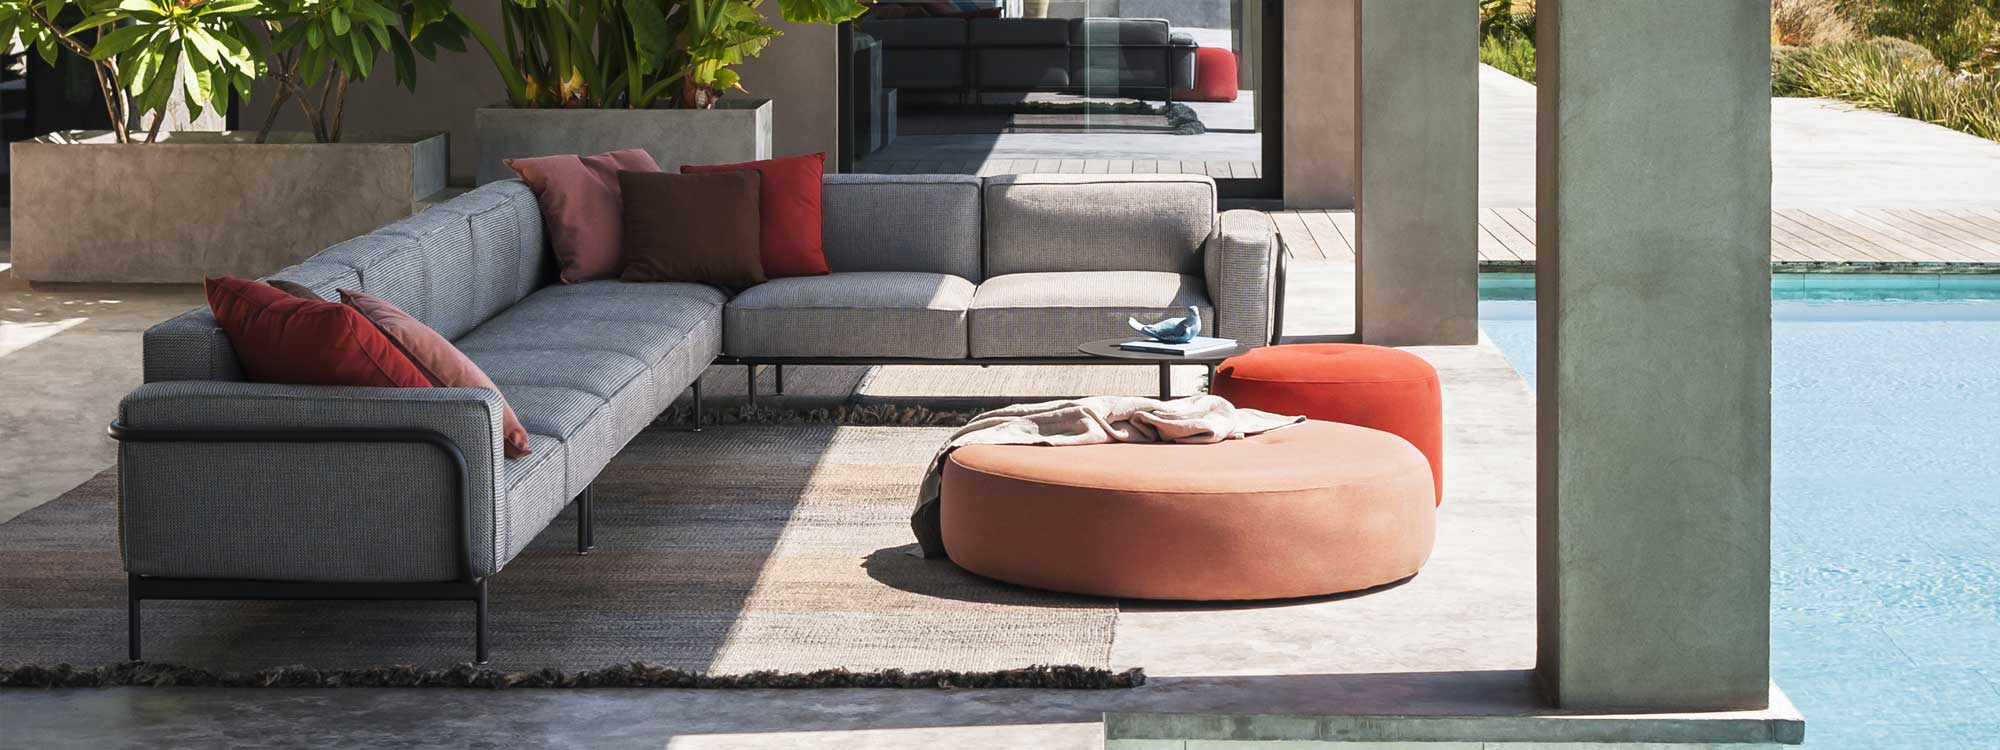 Image of RODA contemporary garden corner sofa with black tubular frame and grey cushions, together with pair of Double round garden poufs